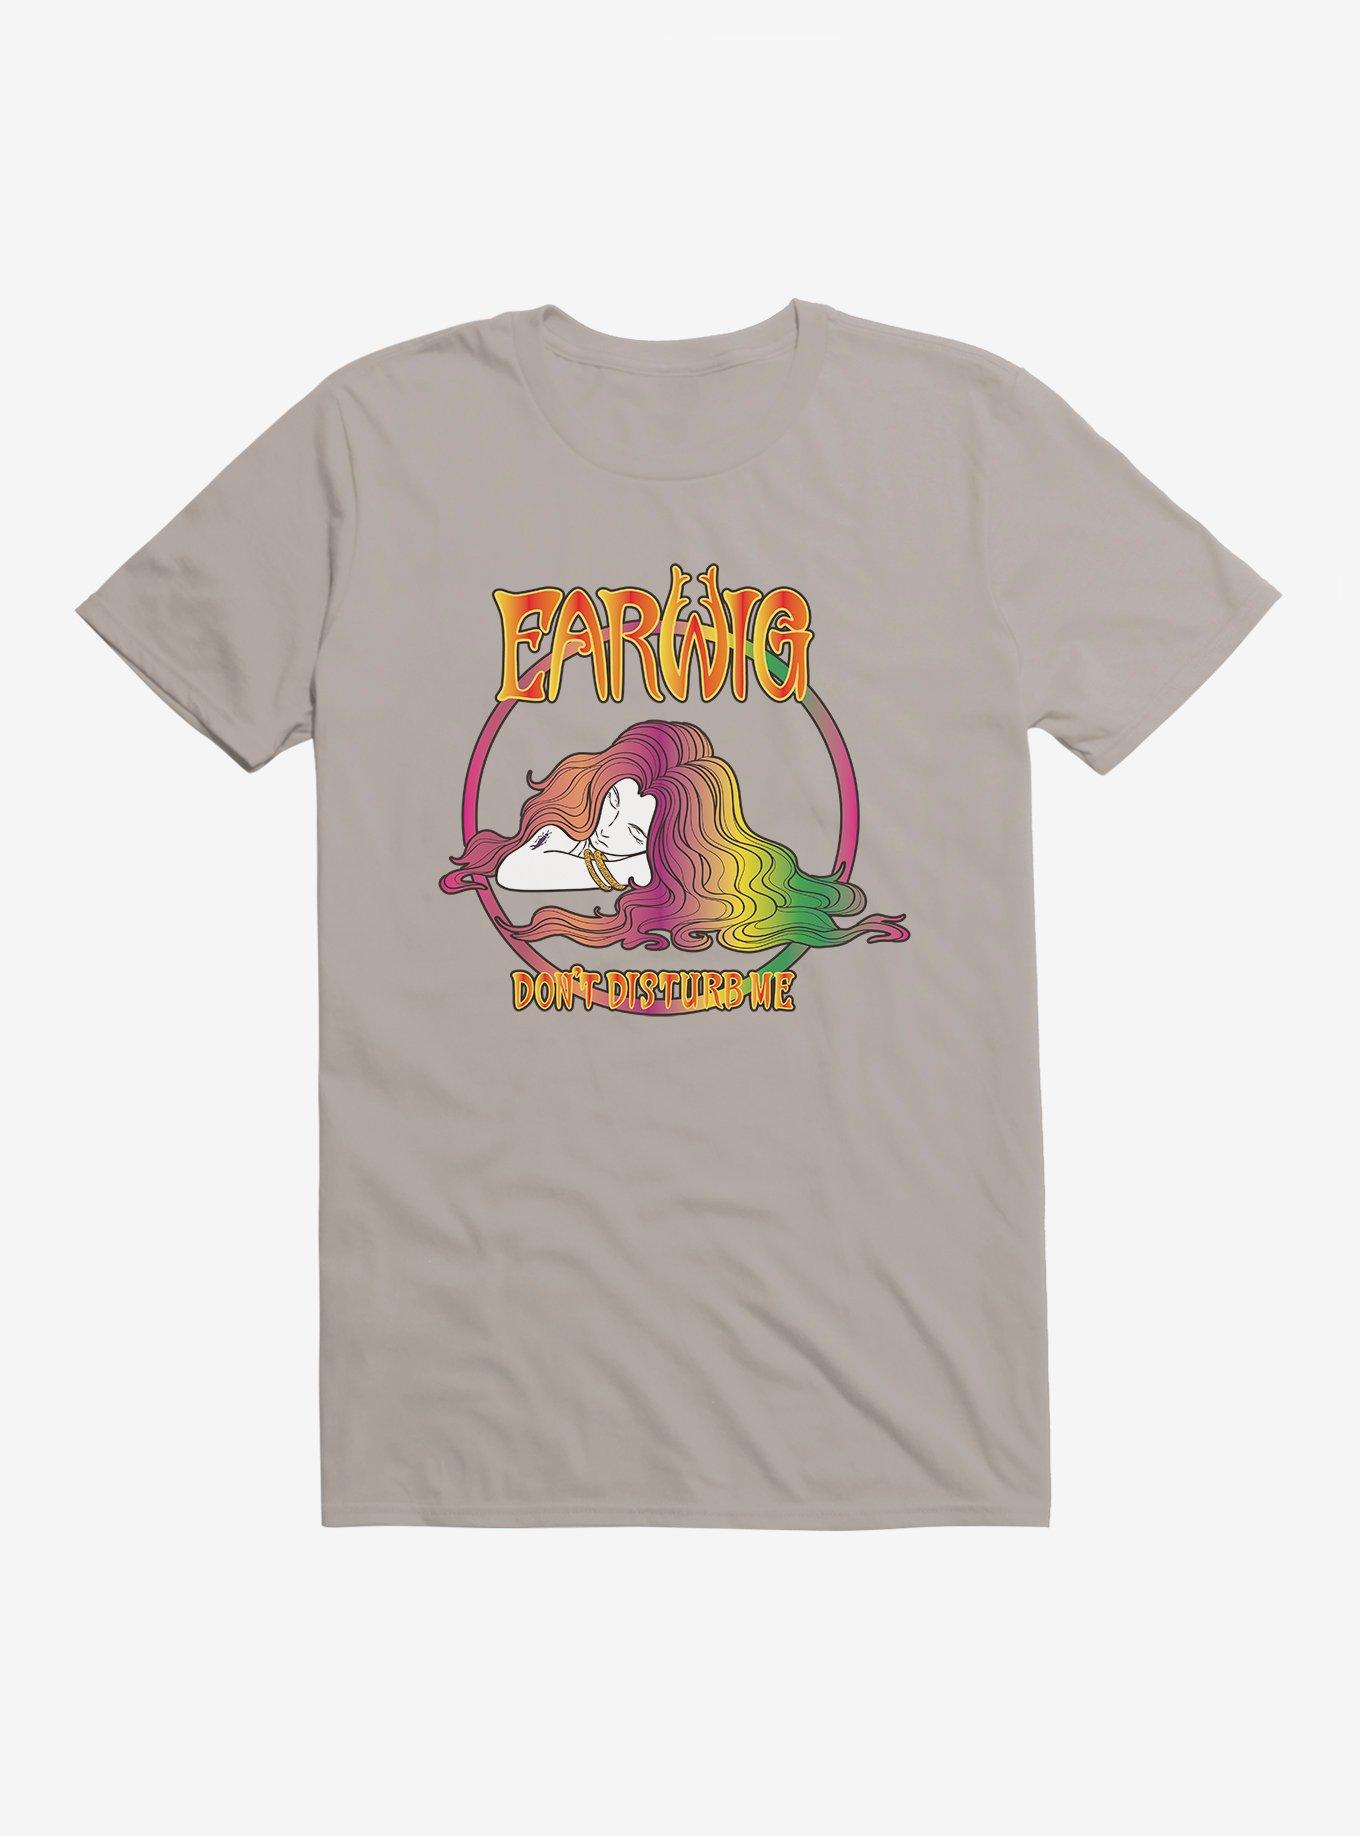 Studio Ghibli Earwig And The Witch Don't Disturb Me T-Shirt | BoxLunch